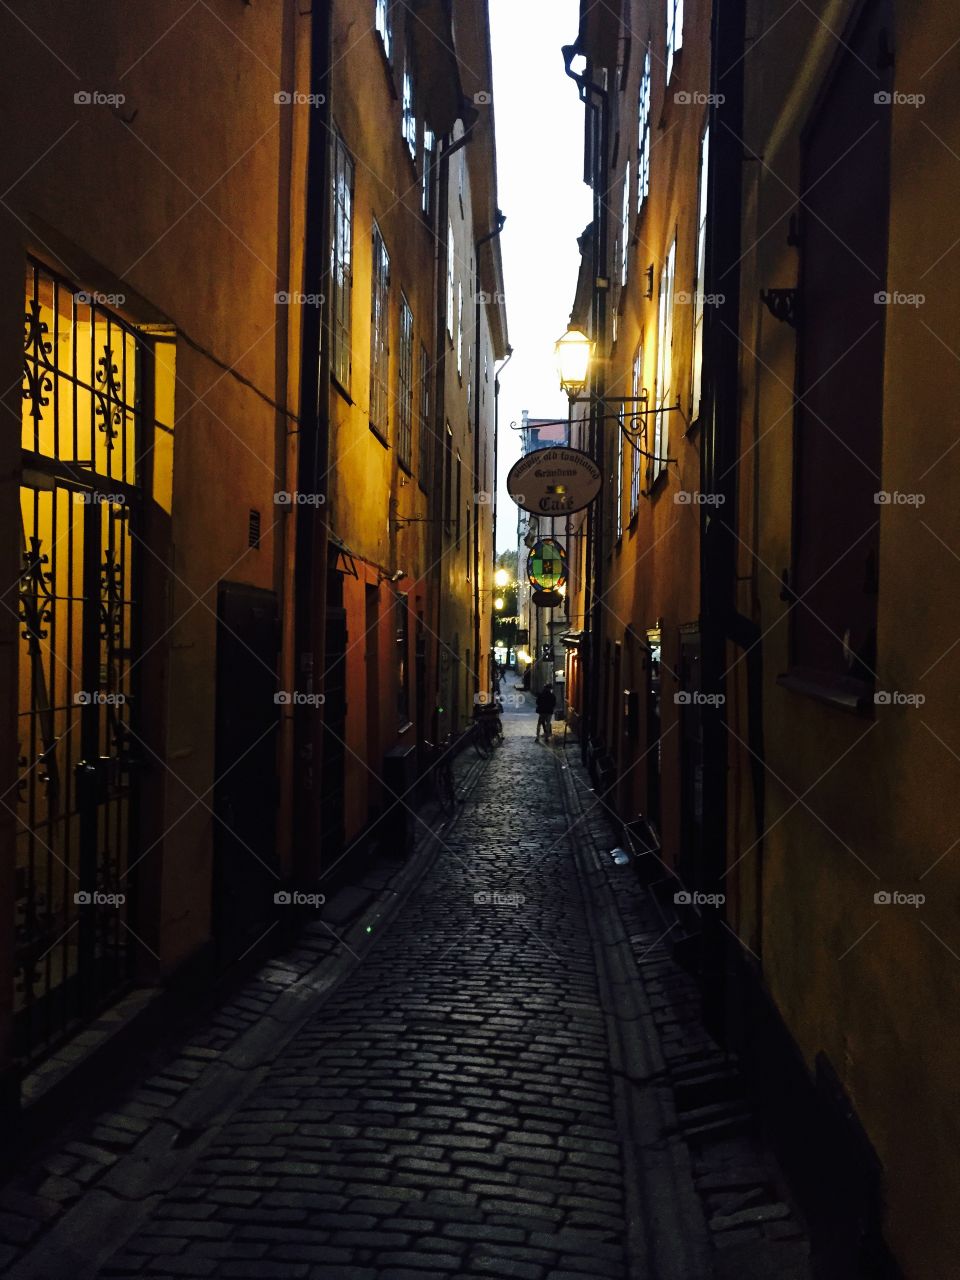 An evening in the Old Town. A photo taken in an alleyway in Gamla Stan, Stockholm, Sweden. Feels like I am in a different century. 